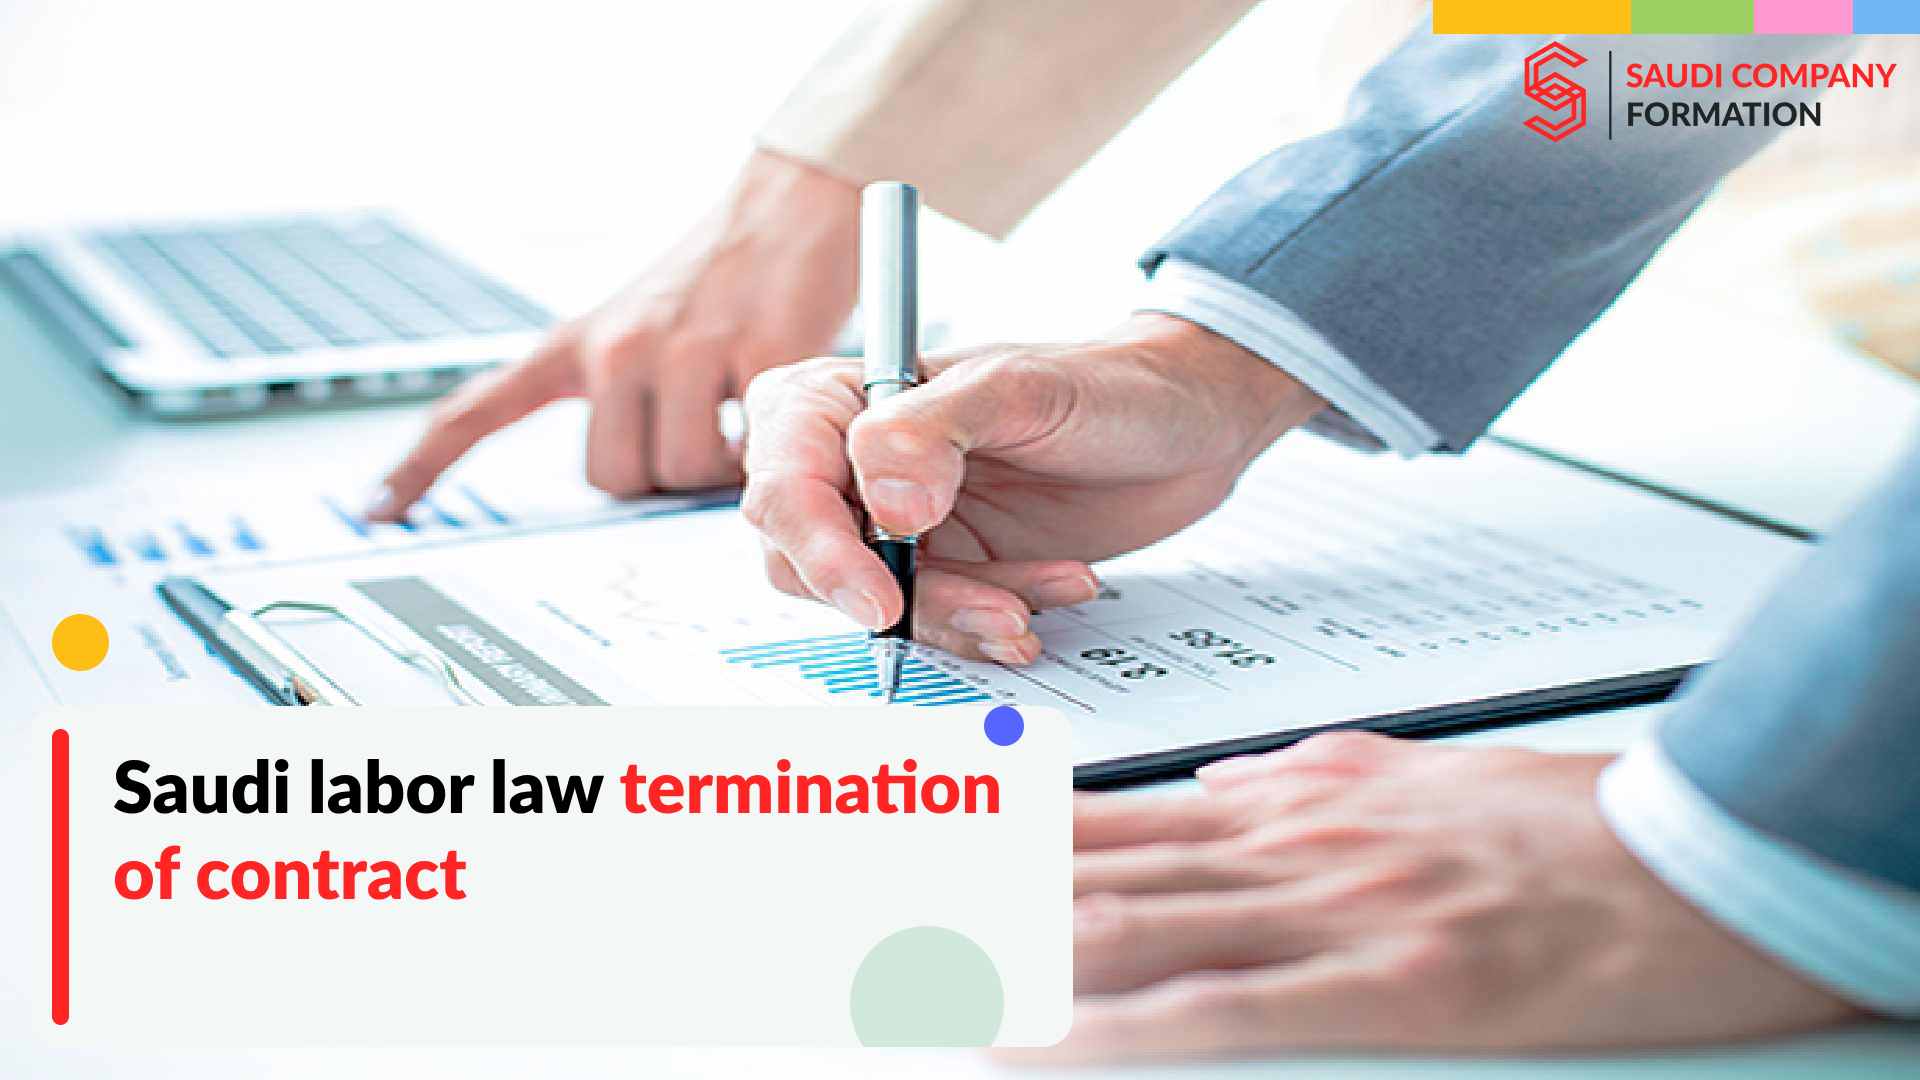 Saudi labor law termination of contract by employee